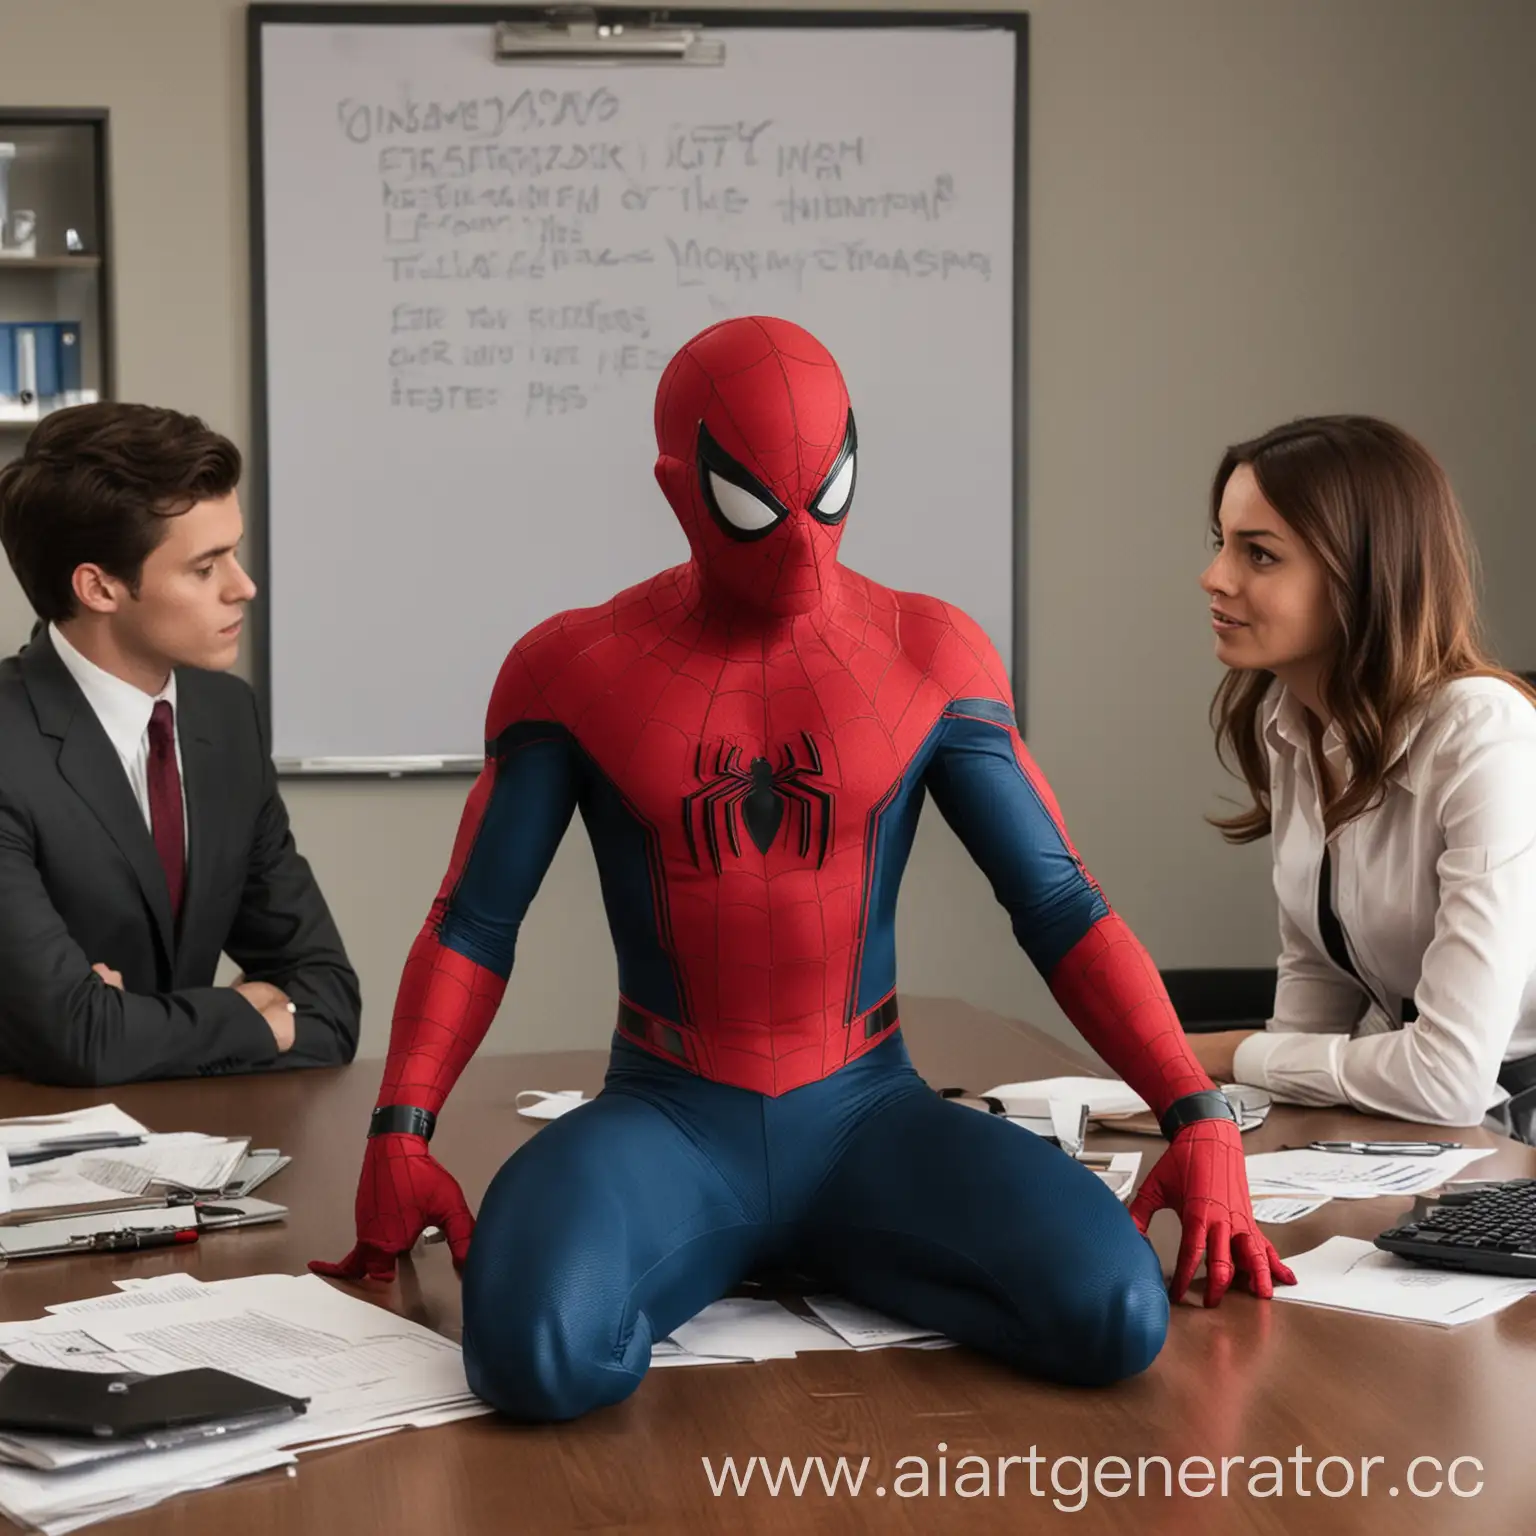 SpiderMan-Hosts-Business-Meeting-in-Modern-Office-Space